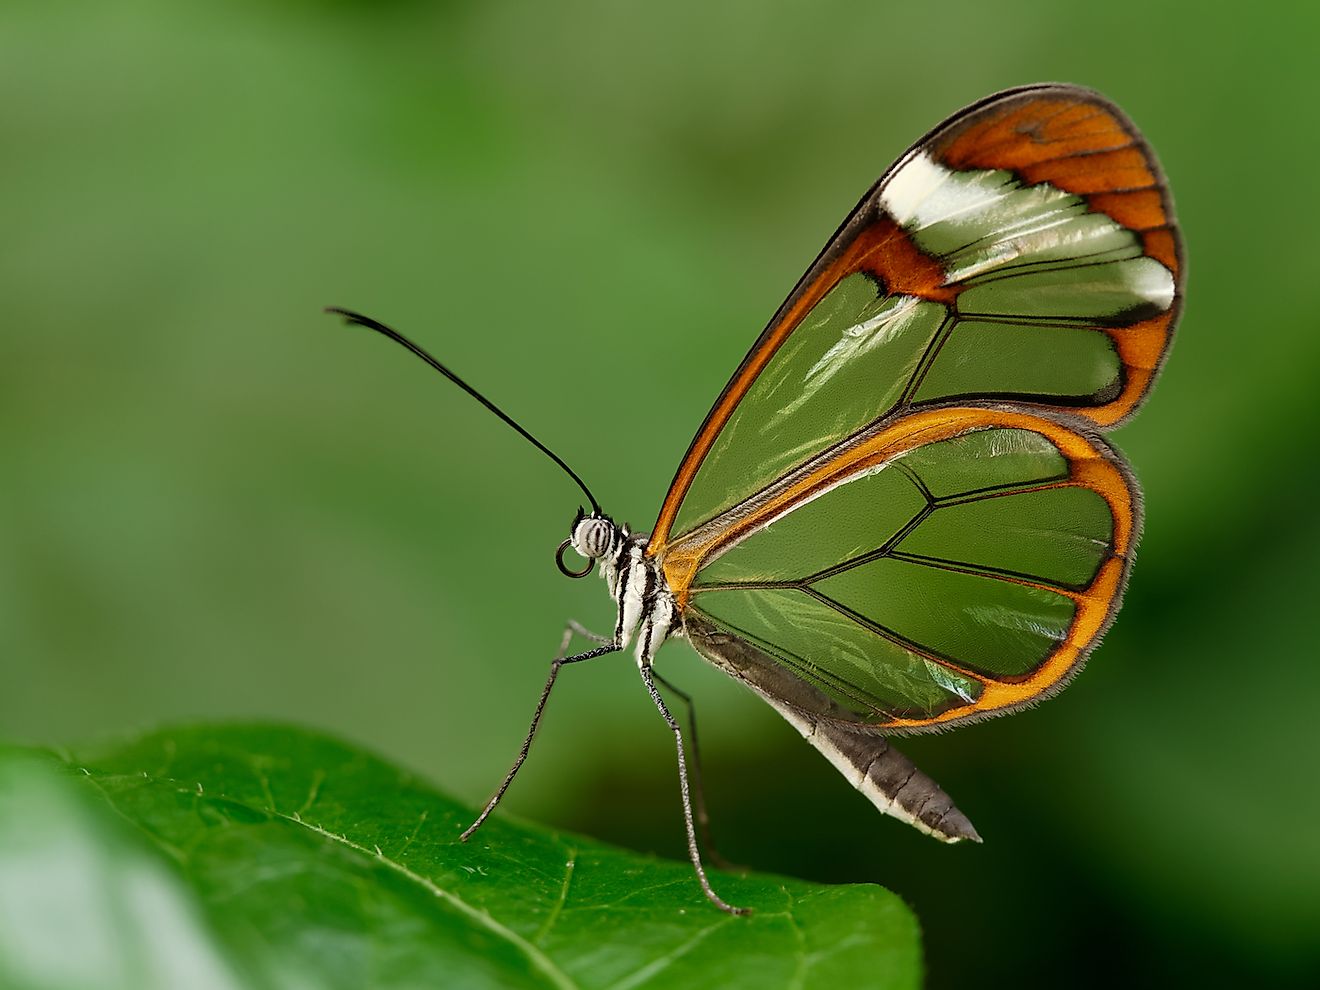 A Glasswinged Butterfly. Image credit: MichelleCoppiens/Shutterstock.com